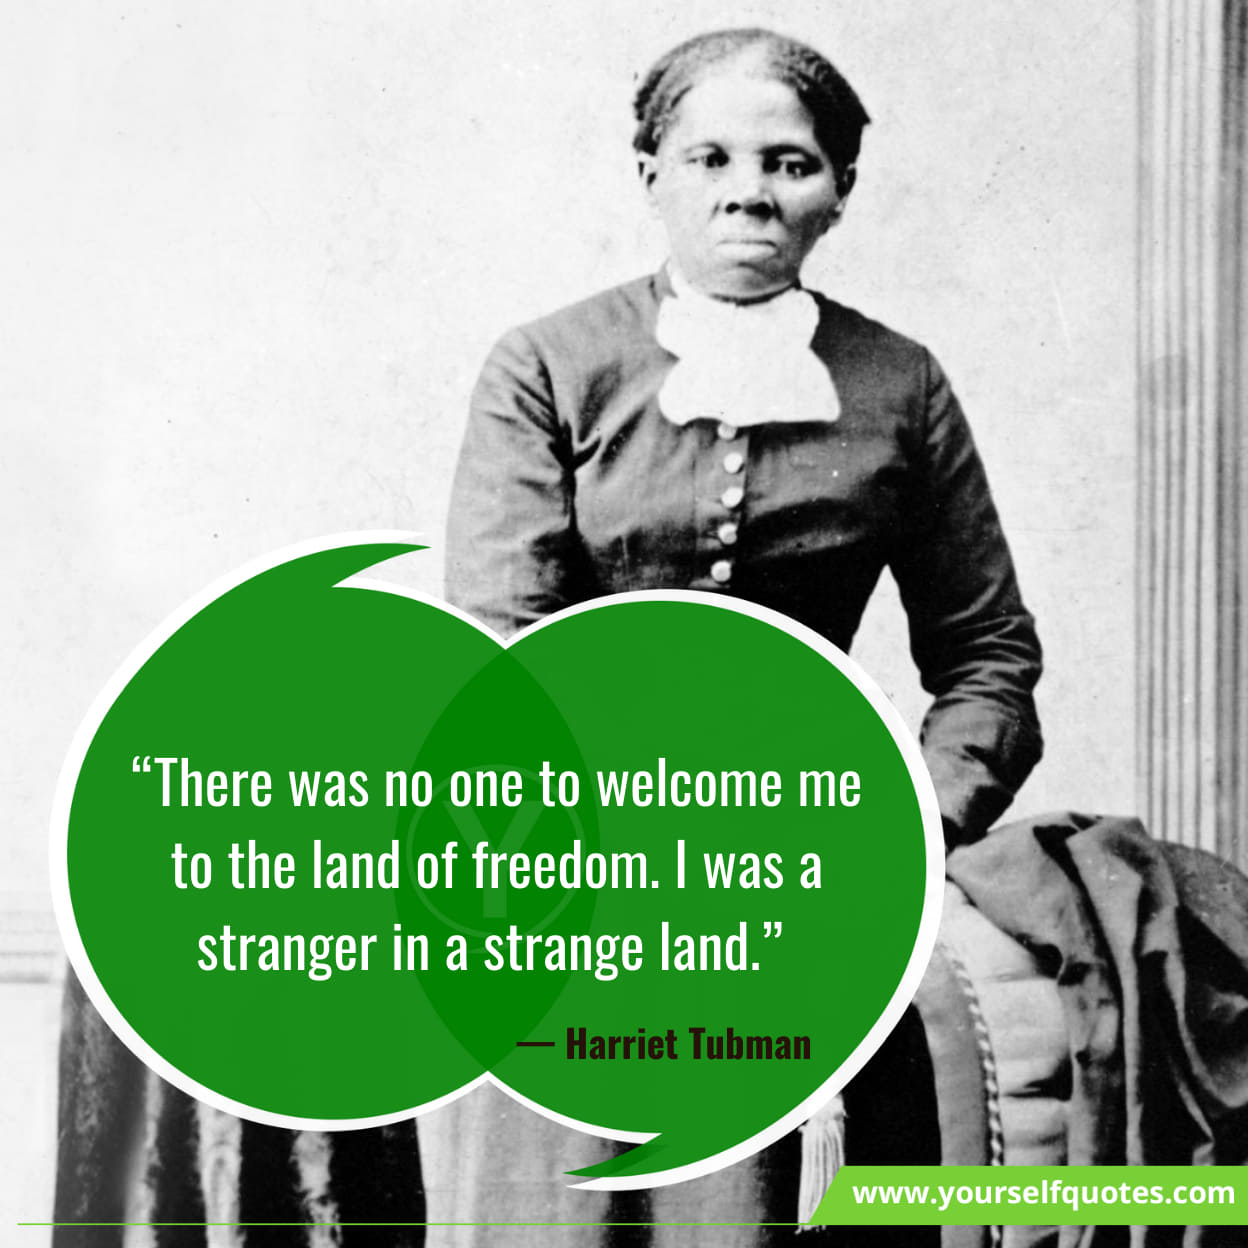 Inspiring Quotes From Harriet Tubman